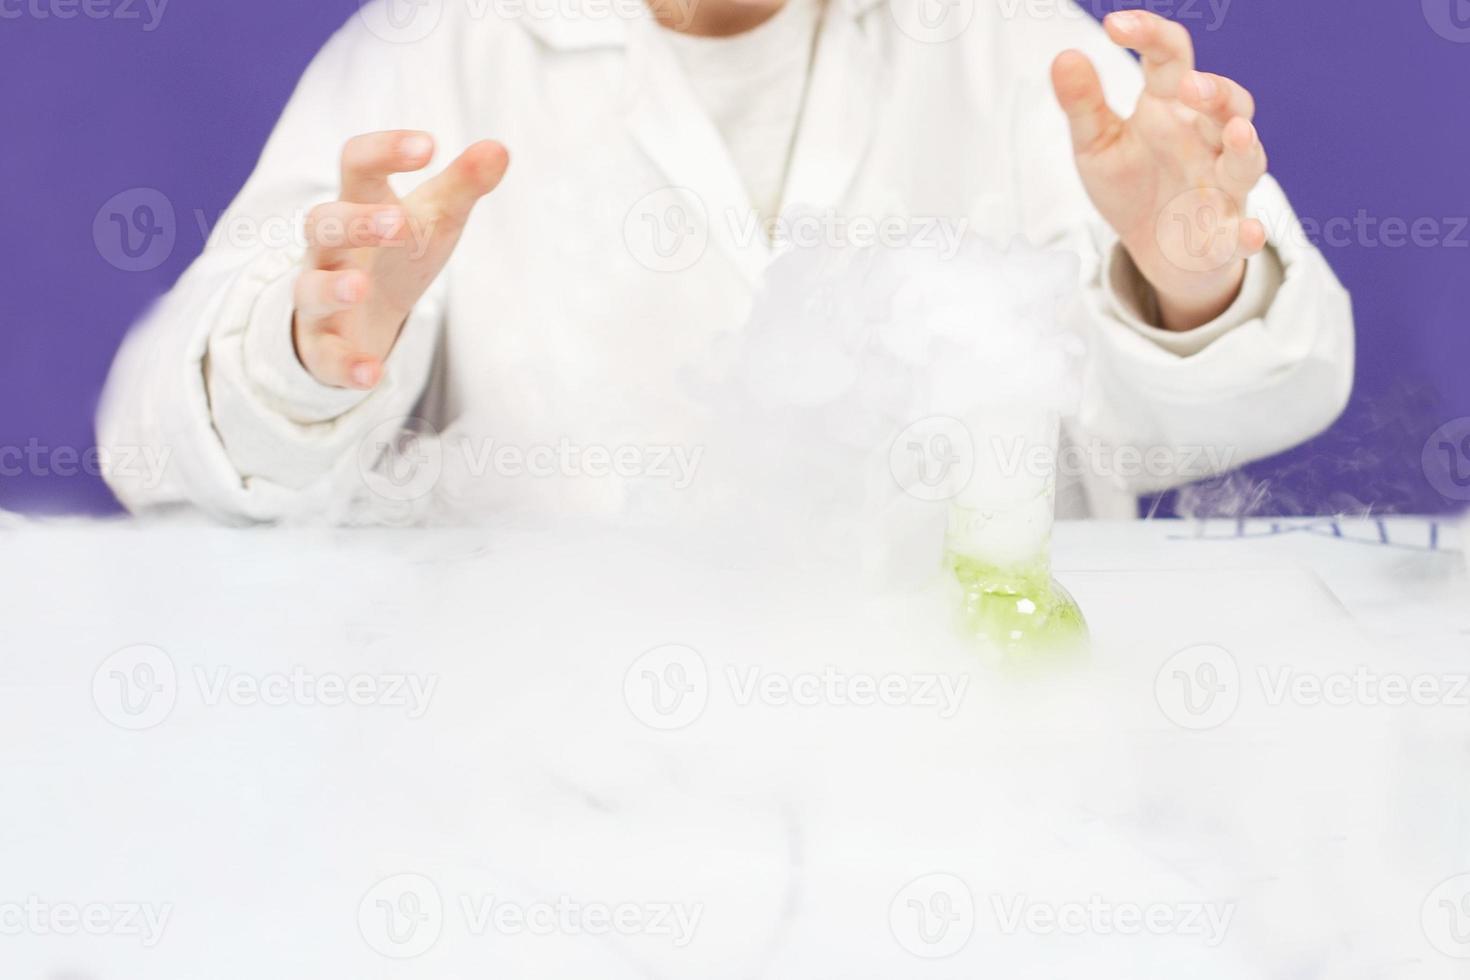 boy study science education. Chemical laboratory with test tubes for experiments and multi-colored liquids photo